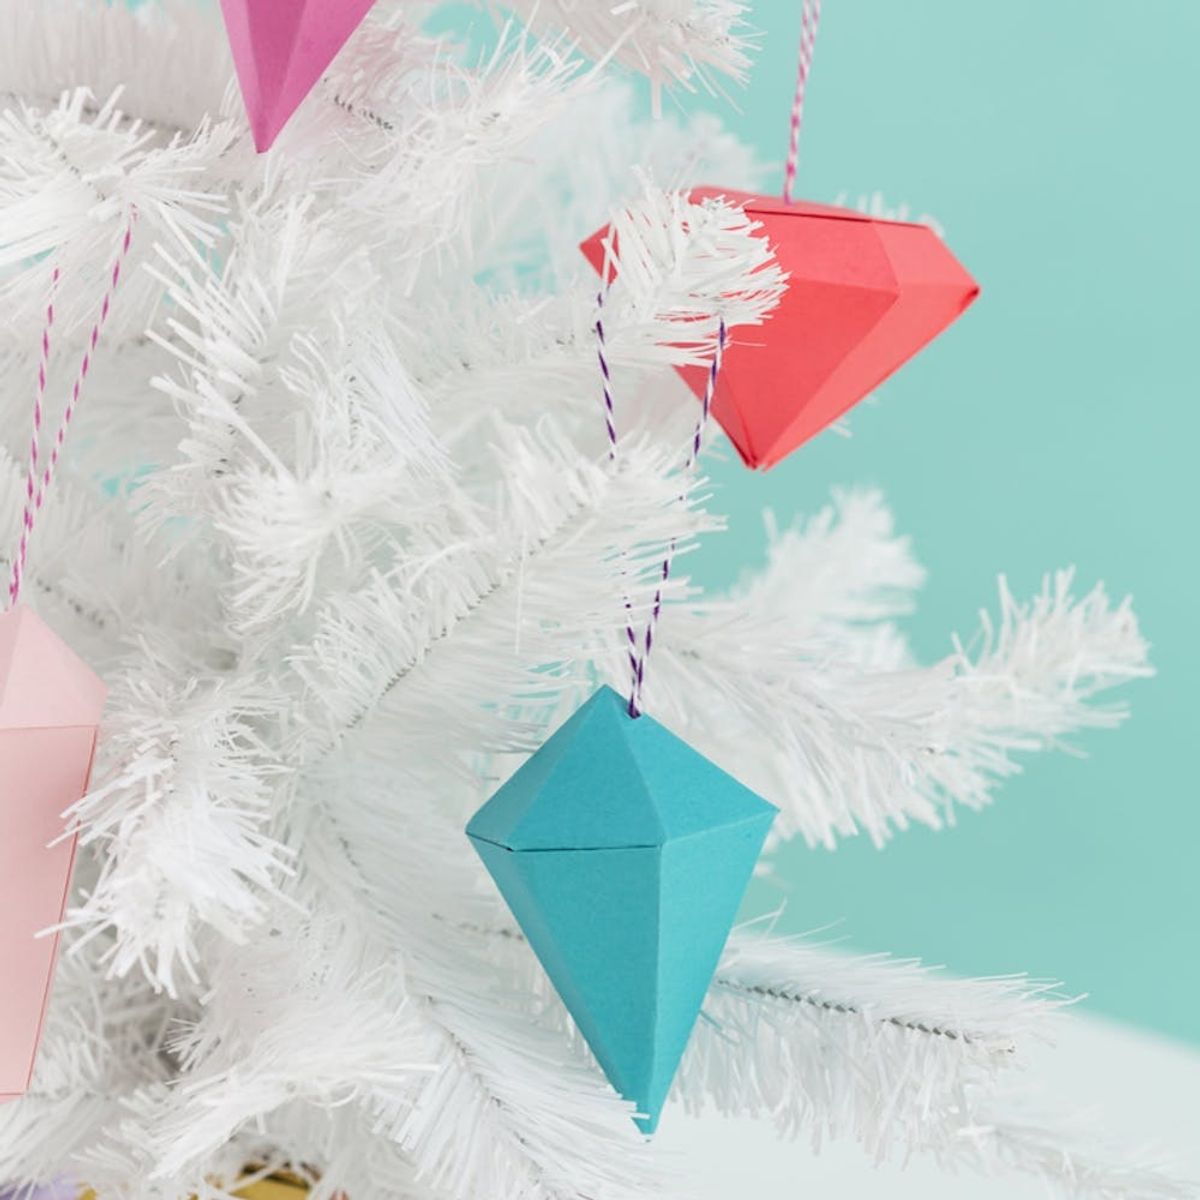 Free Printable Friday: Colorful 3D Gem Ornaments